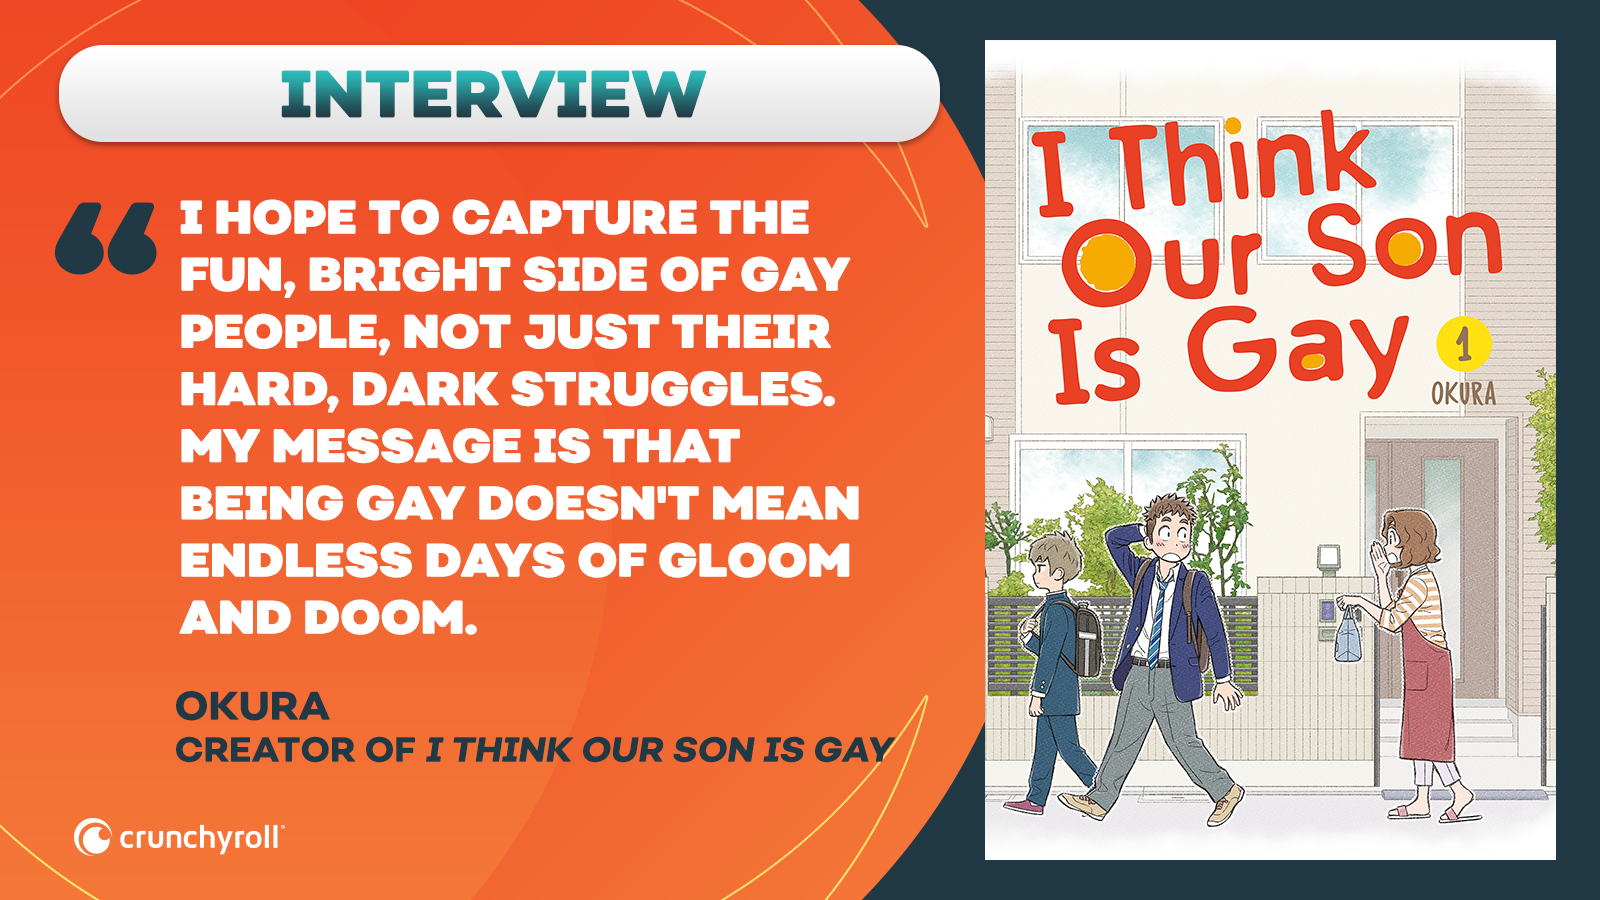 #INTERVIEW: I Think Our Son Is Gay Author Okura Wants to Share the Happier Side of LGBTQ Stories